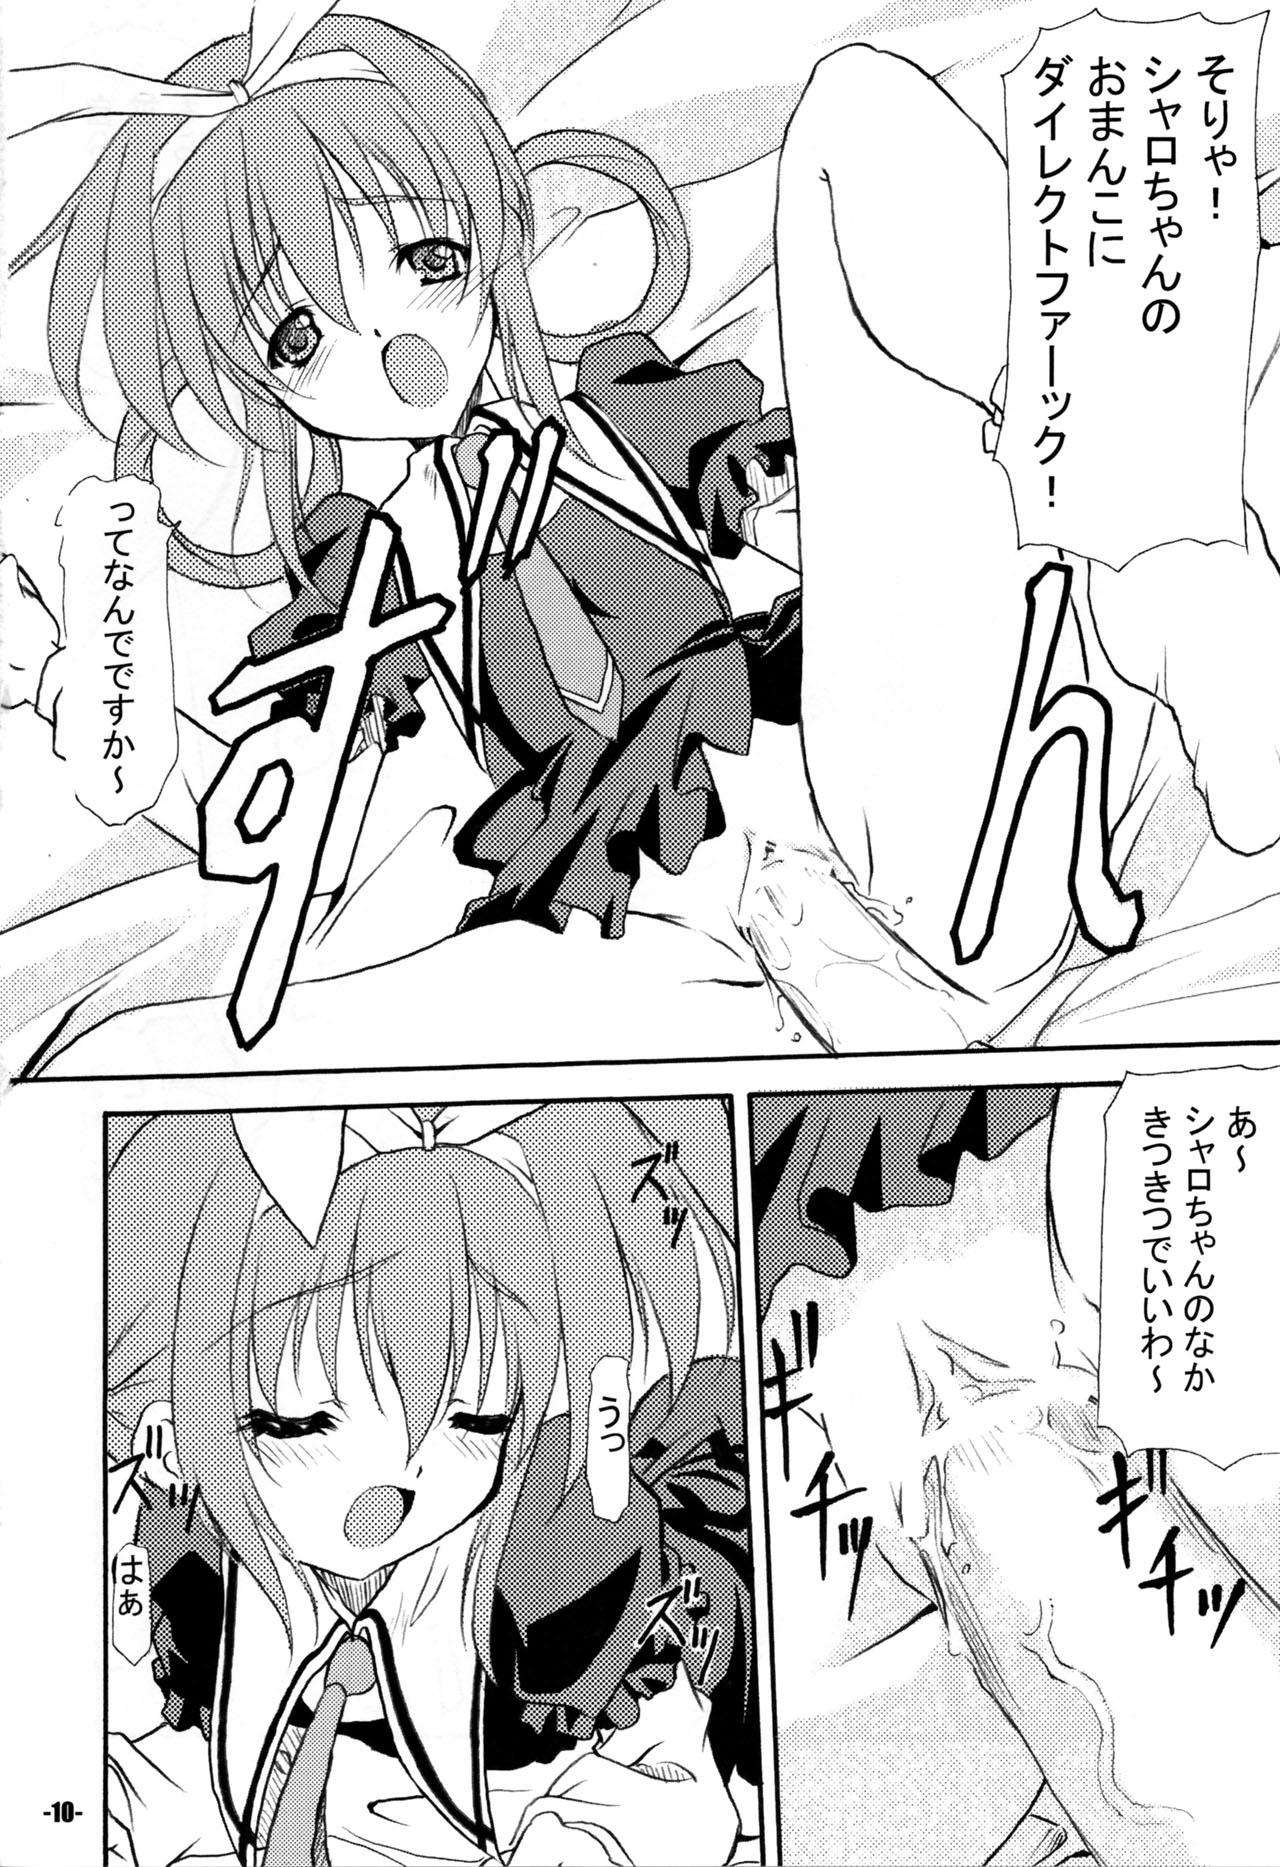 Livecams SHALO SHALO - Tantei opera milky holmes Roughsex - Page 10